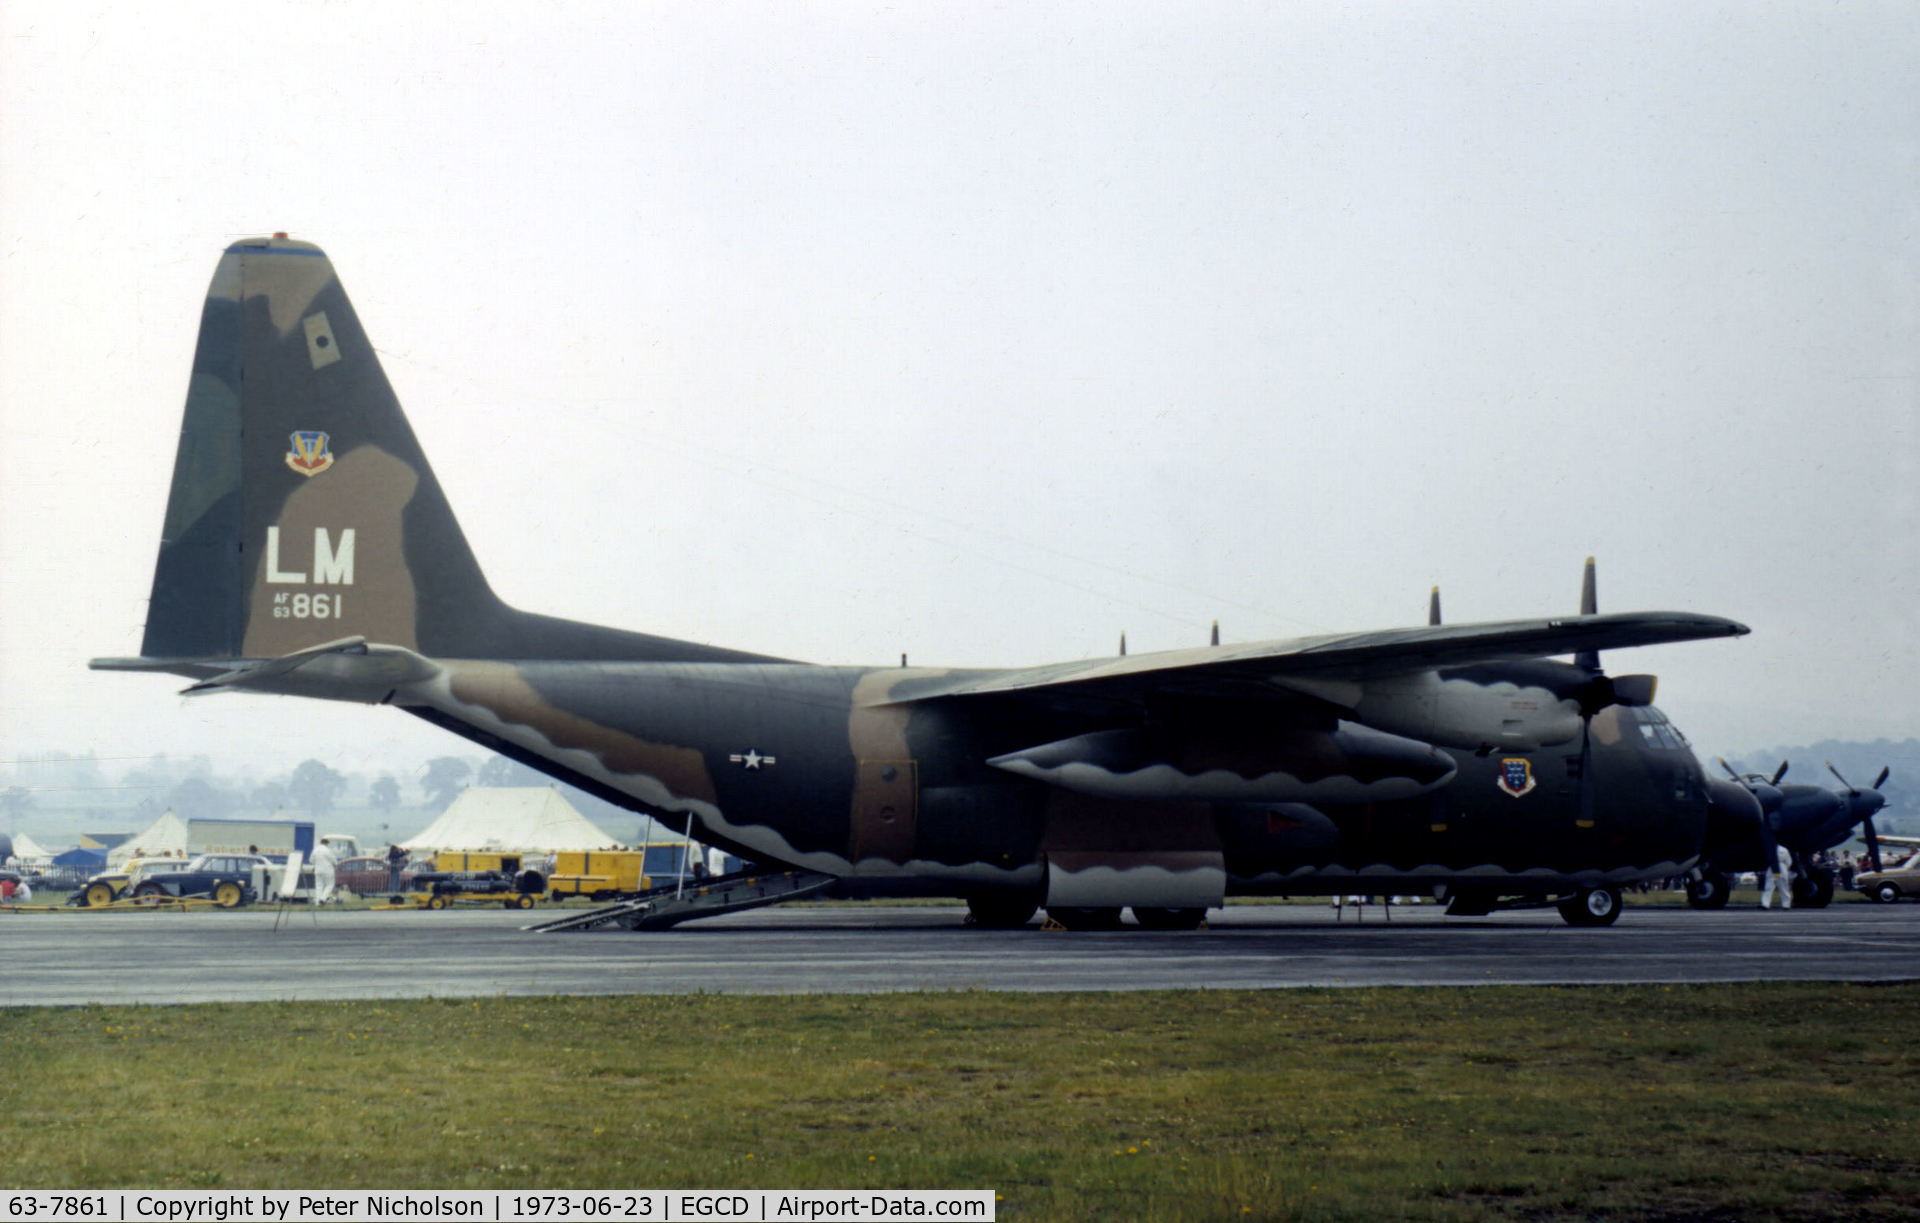 63-7861, 1963 Lockheed C-130E Hercules C/N 382-3931, C-130E Hercules of the 316th Tactical Airlift Wing on display at the 1973 Woodford Airshow.